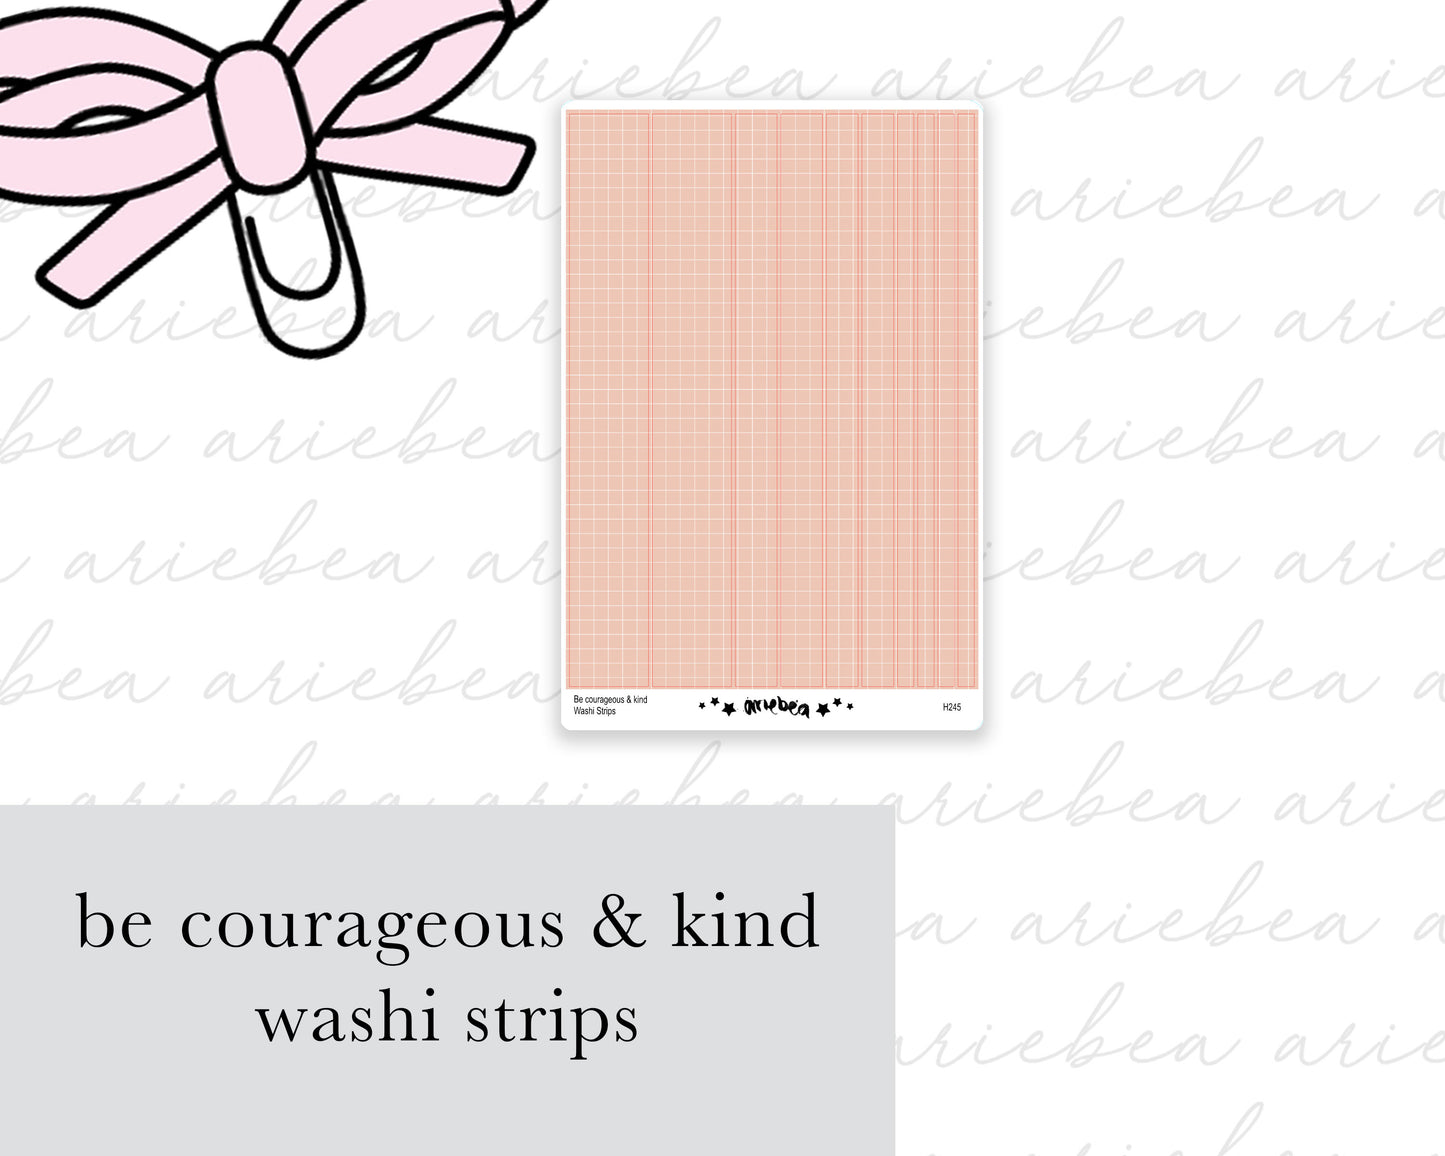 Be Courageous & Kind Mini Kit (4 pages)